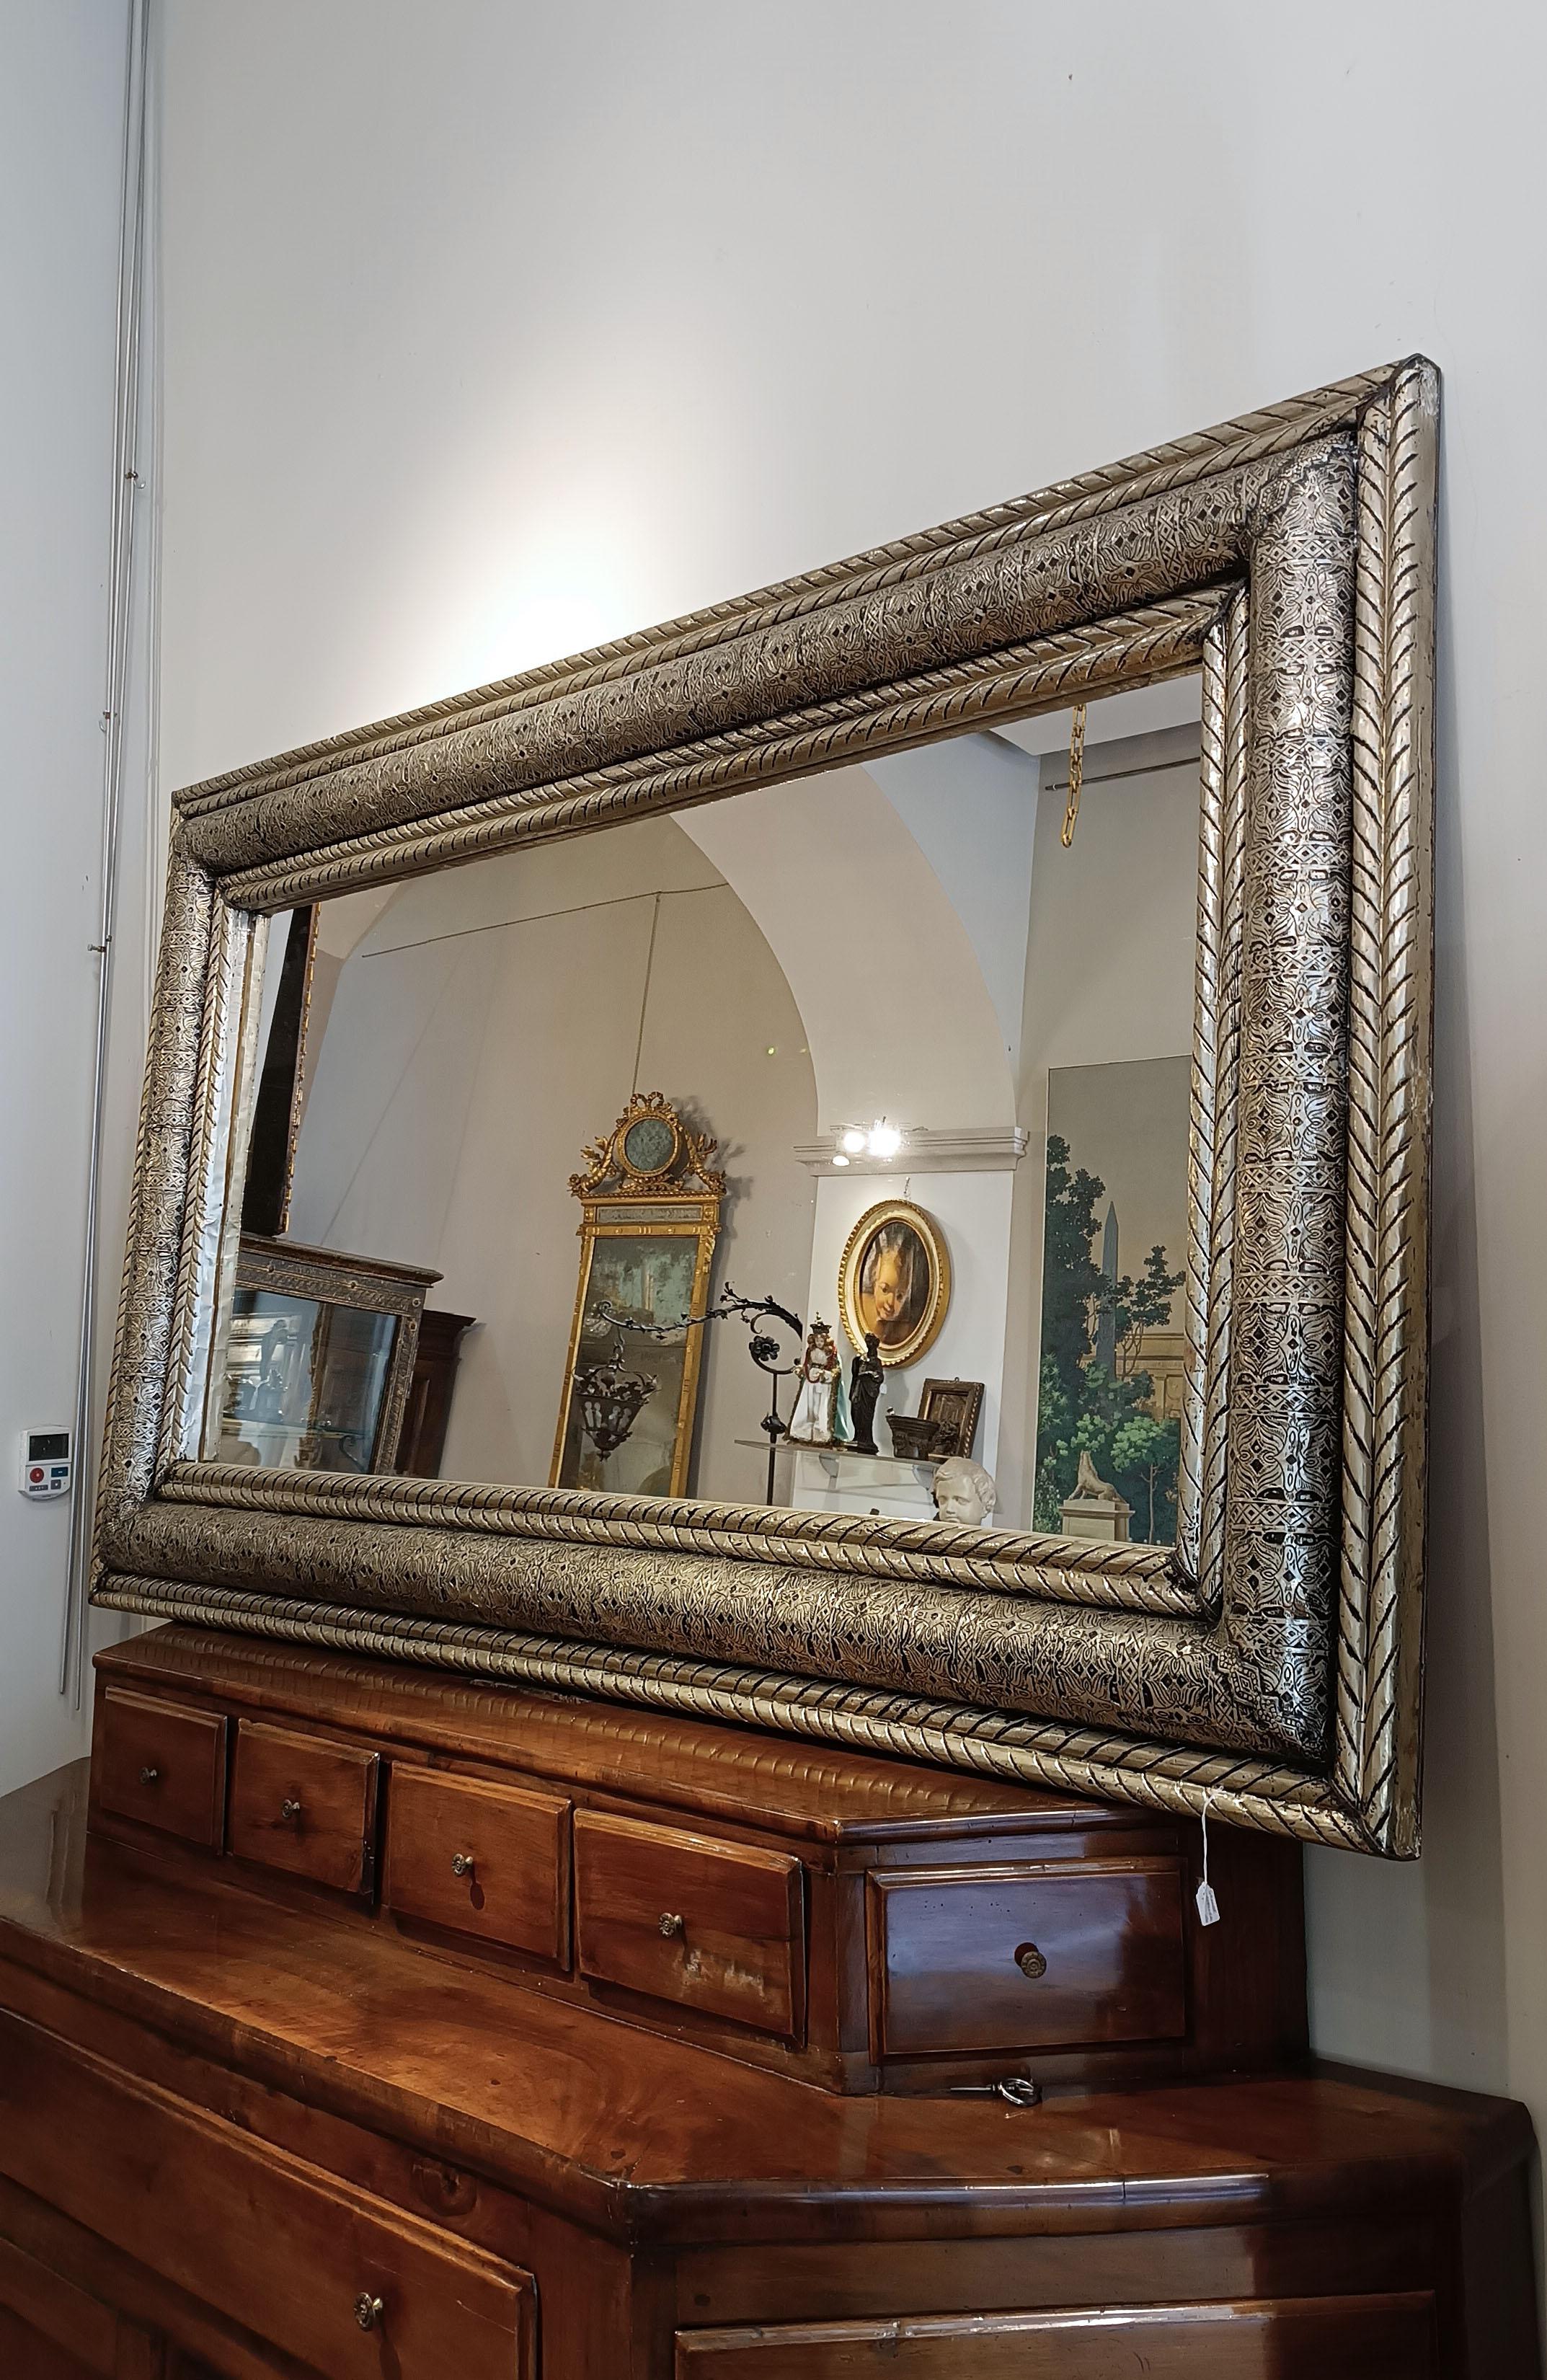 Italian END OF THE 19th CENTURY LARGE SILVER-PLATED COPPER MIRROR  For Sale